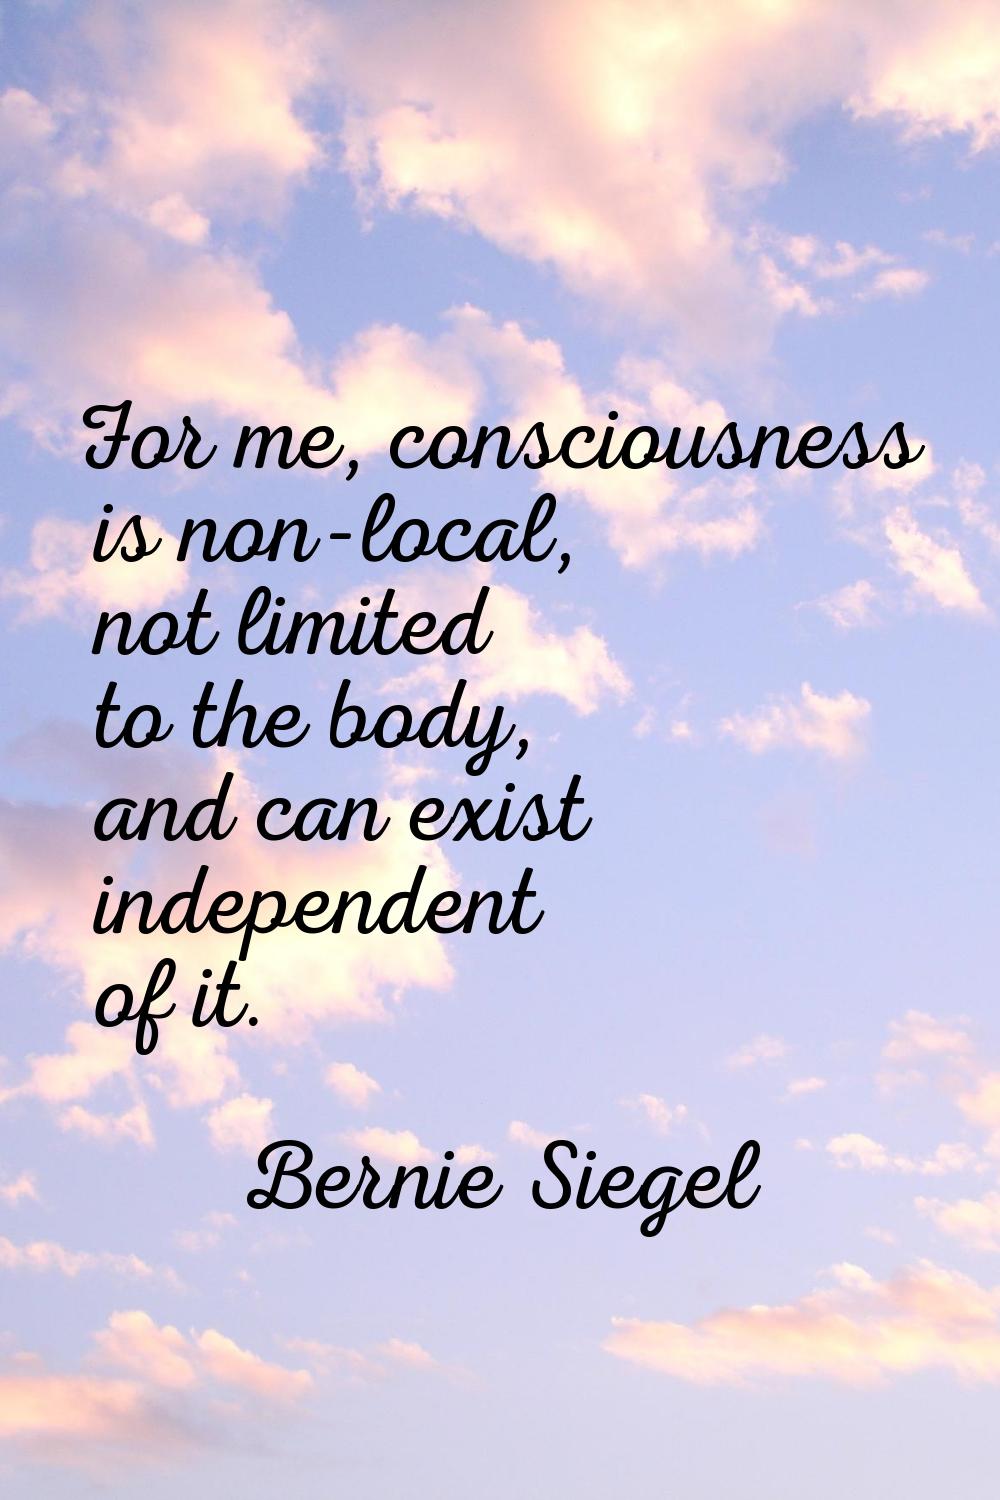 For me, consciousness is non-local, not limited to the body, and can exist independent of it.